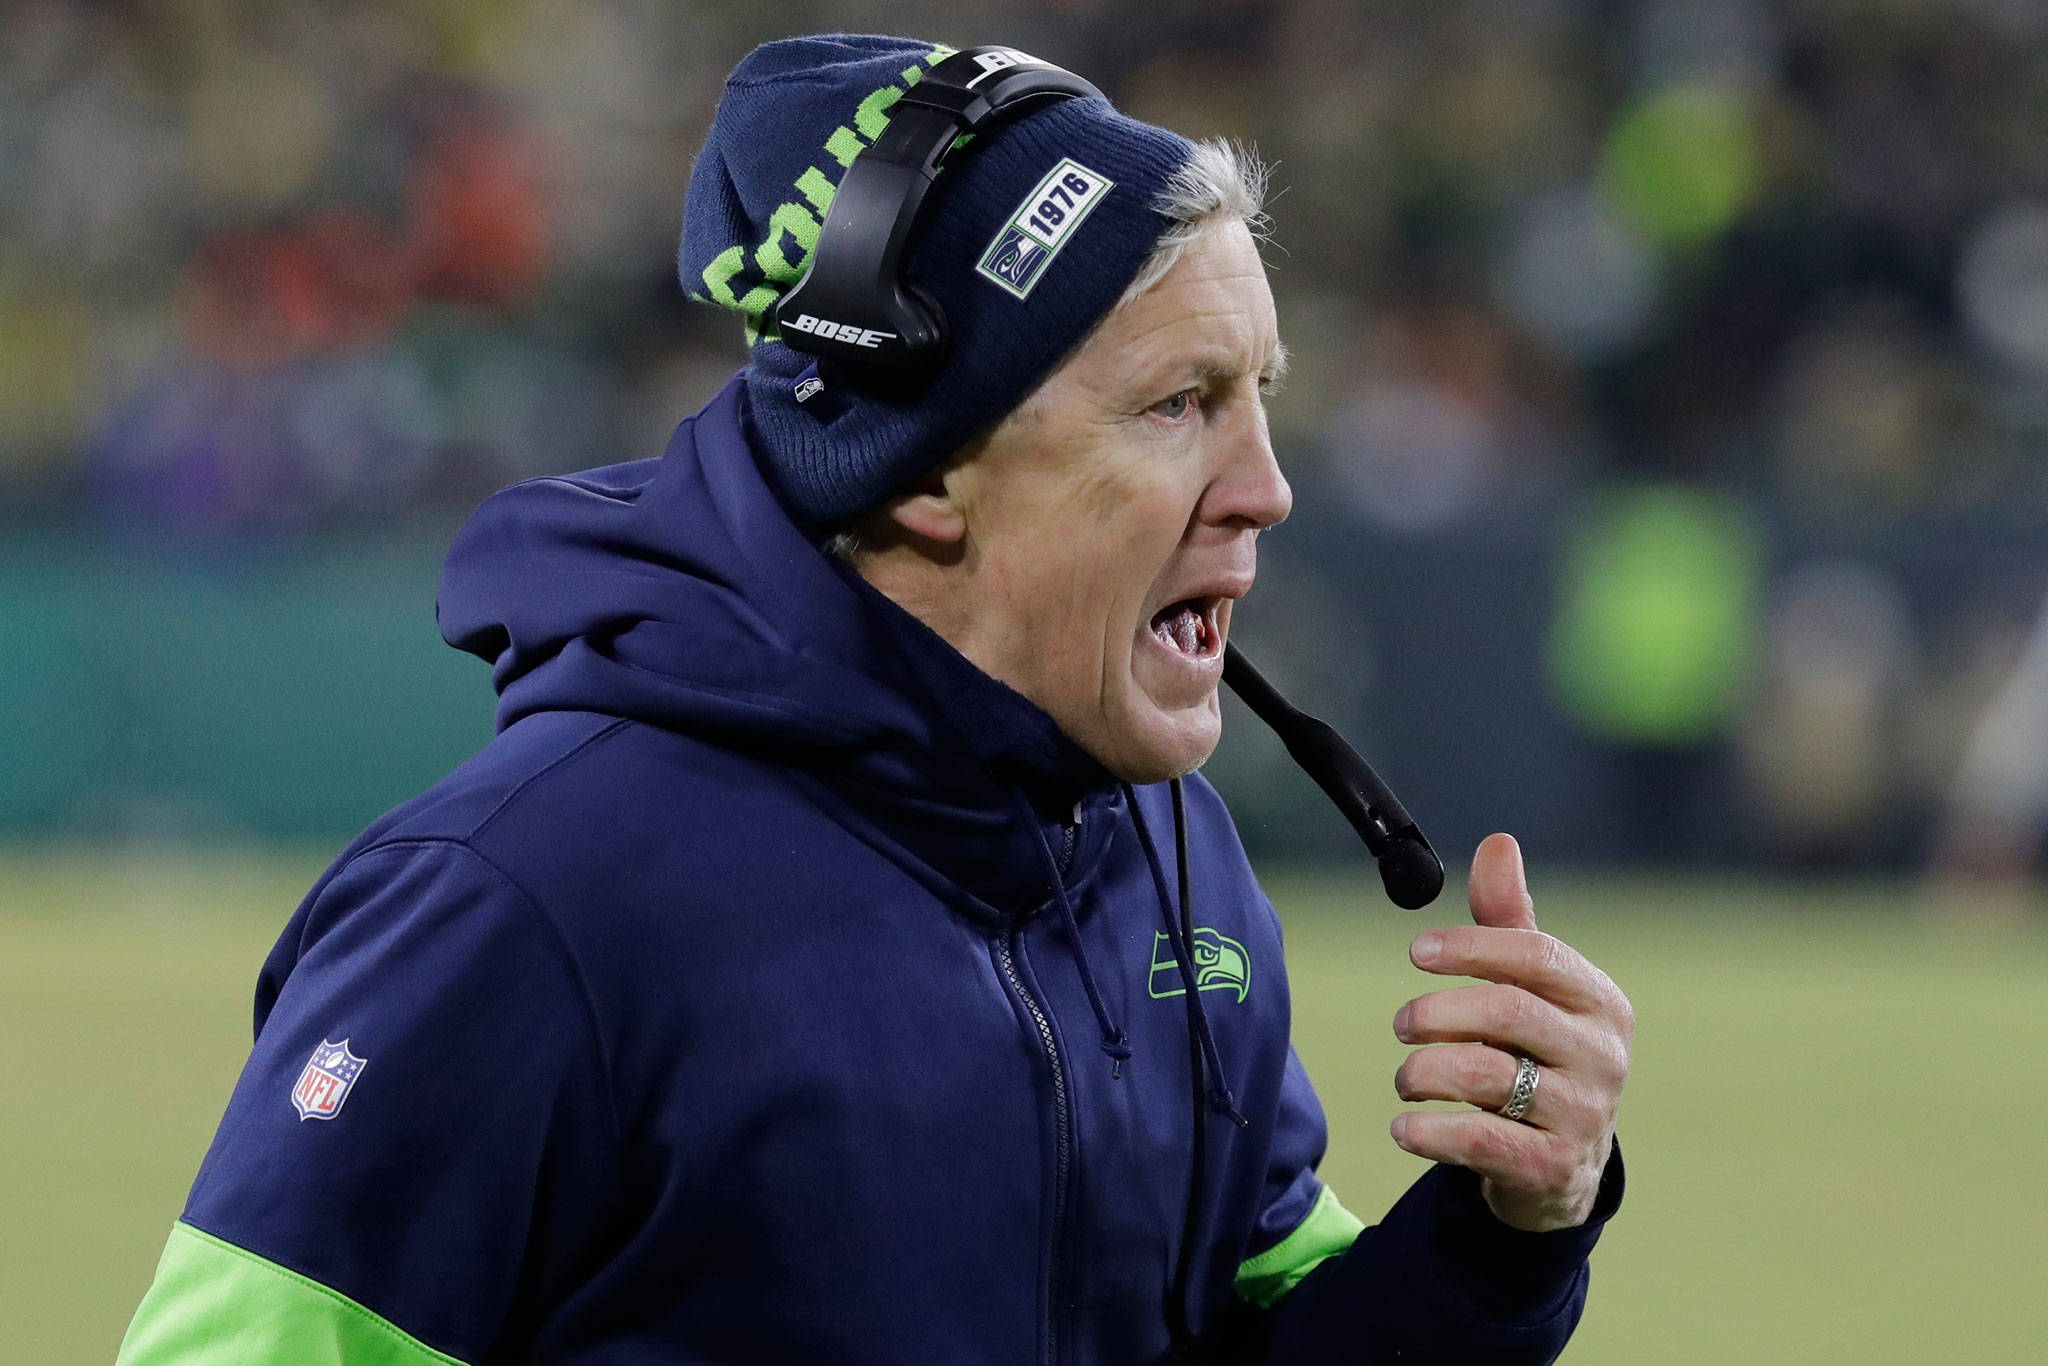 Seattle head coach Pete Carroll has a lifetime record of 133-90-1 in stints with Seattle, the New York Jets and the New England Patriots. (AP Photo/Darron Cummings)